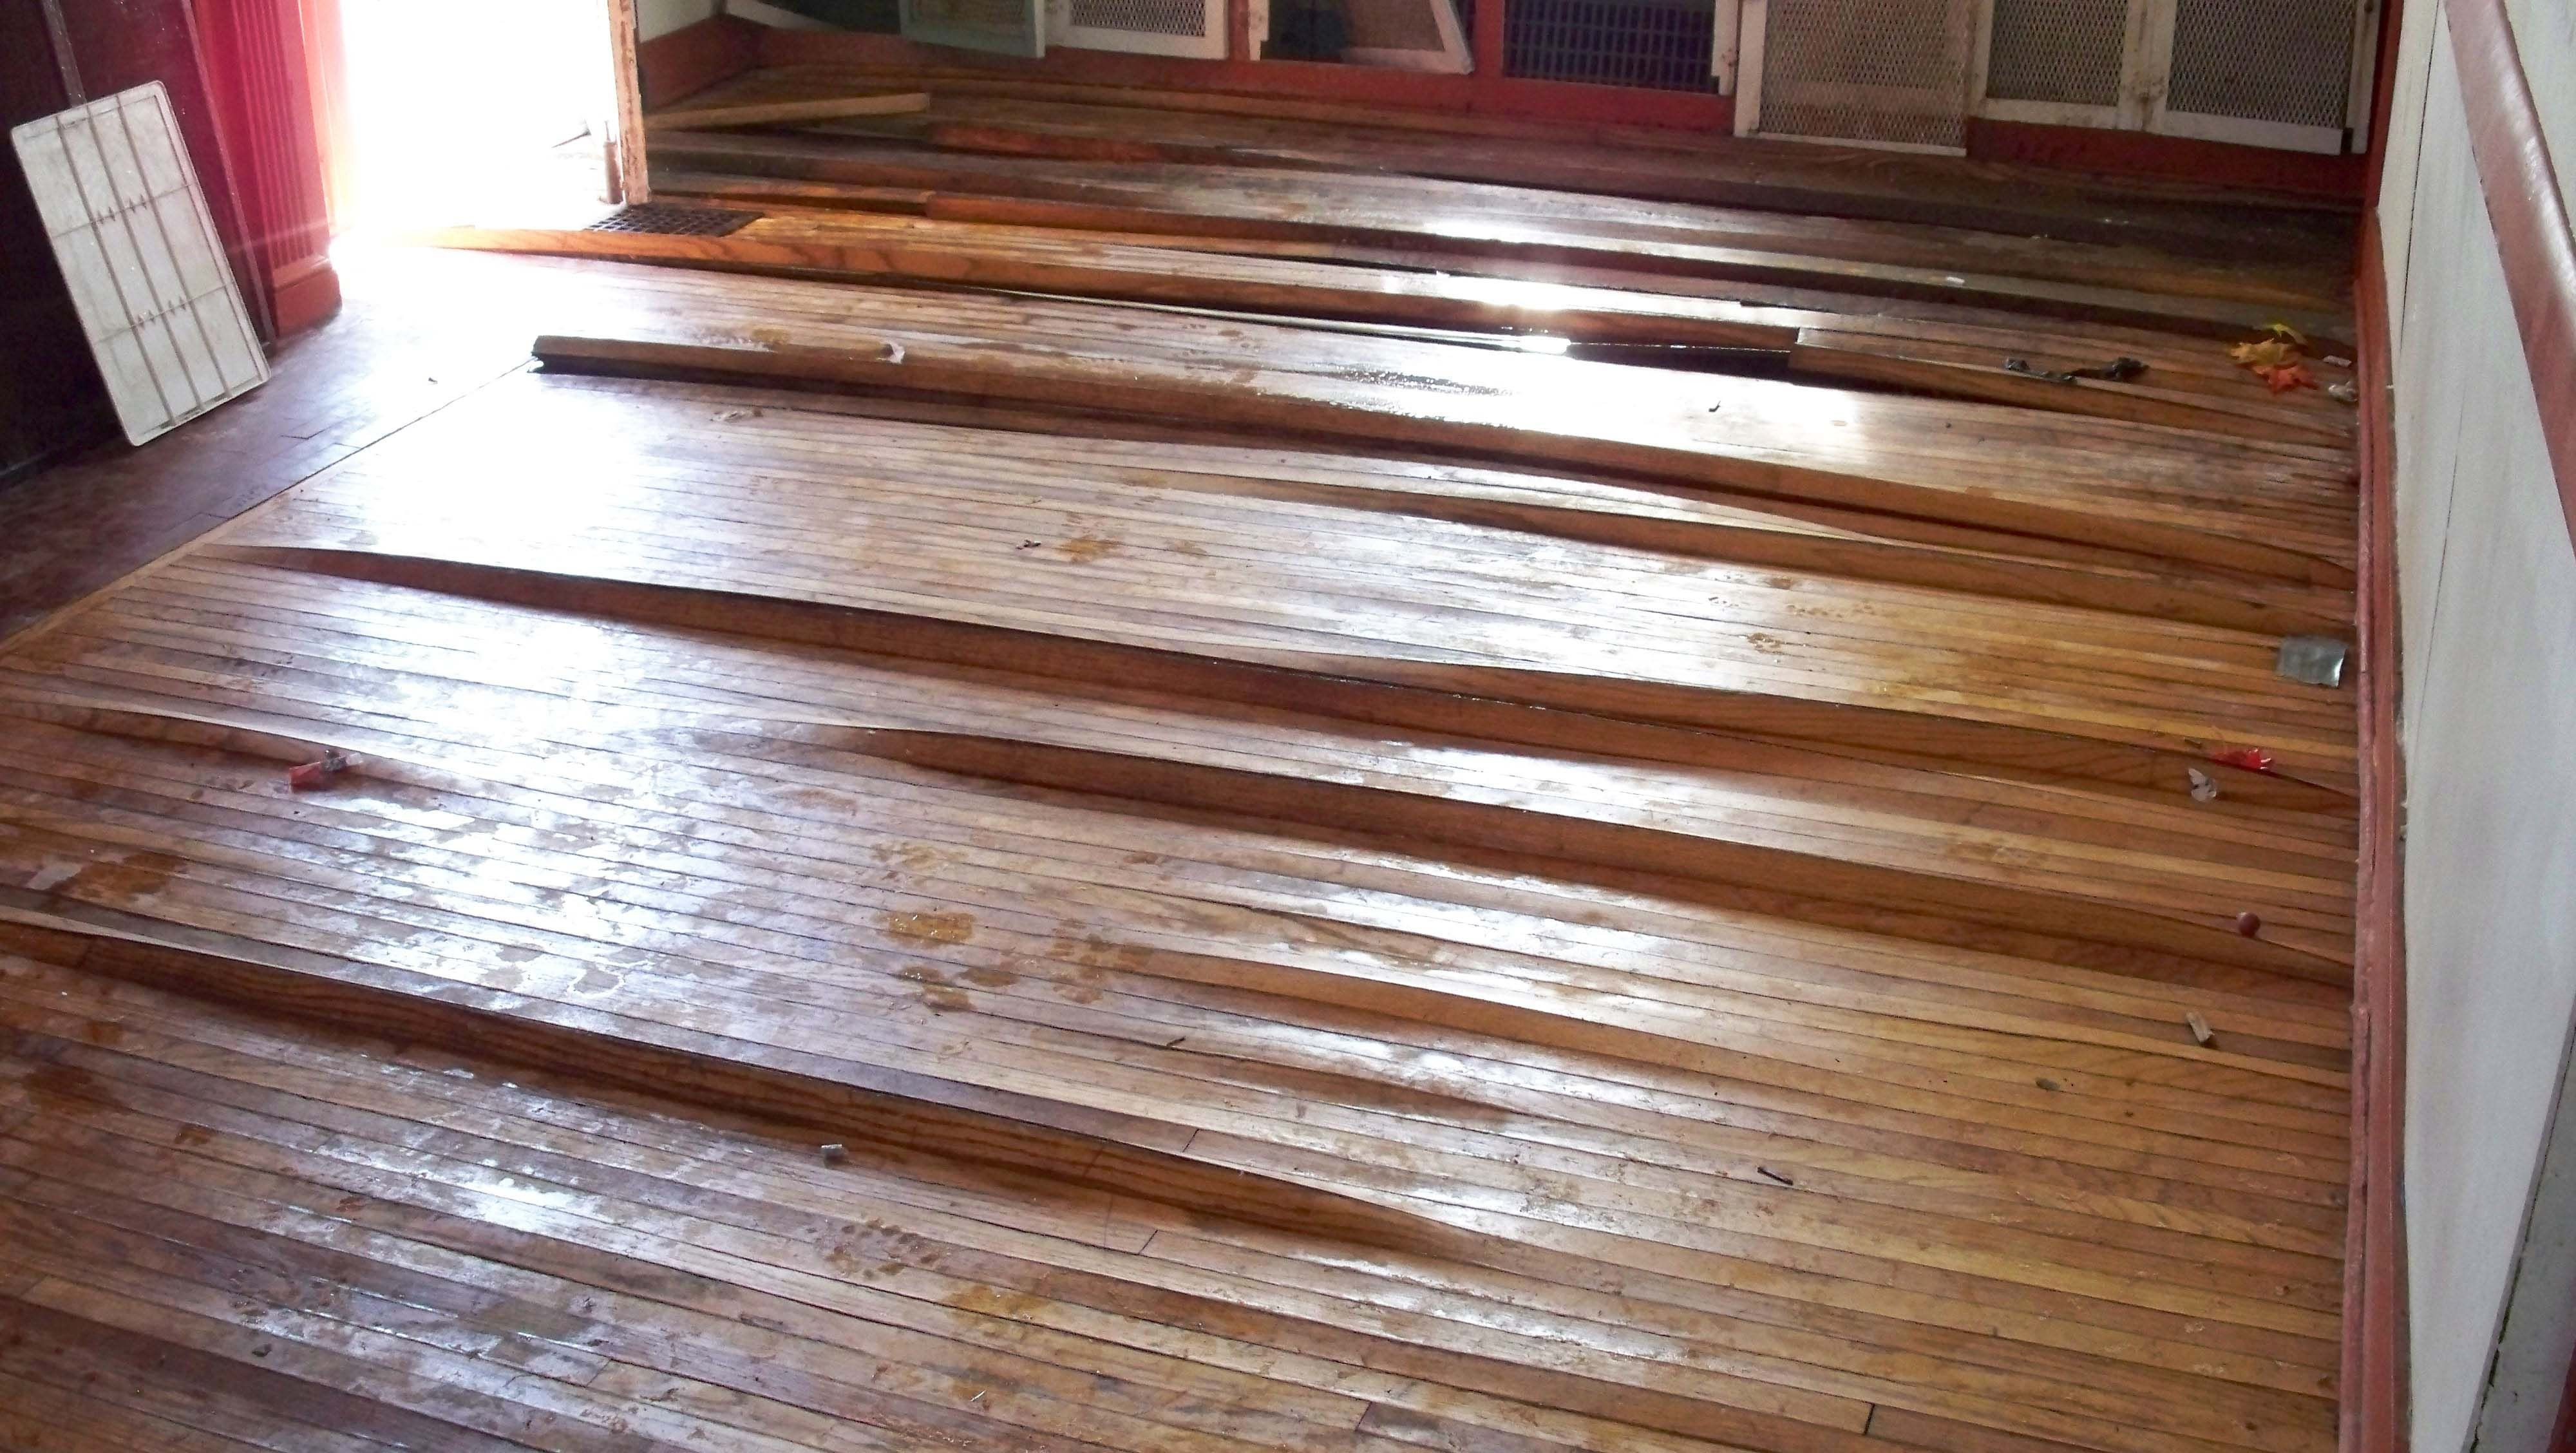 Cost to Install Hardwood Floors On Concrete Of Prefinished Wood Flooring How Much Would It Cost to Install Wood Pertaining to Prefinished Wood Flooring Hardwood Floor Water Damage Warping Hardwood Floors